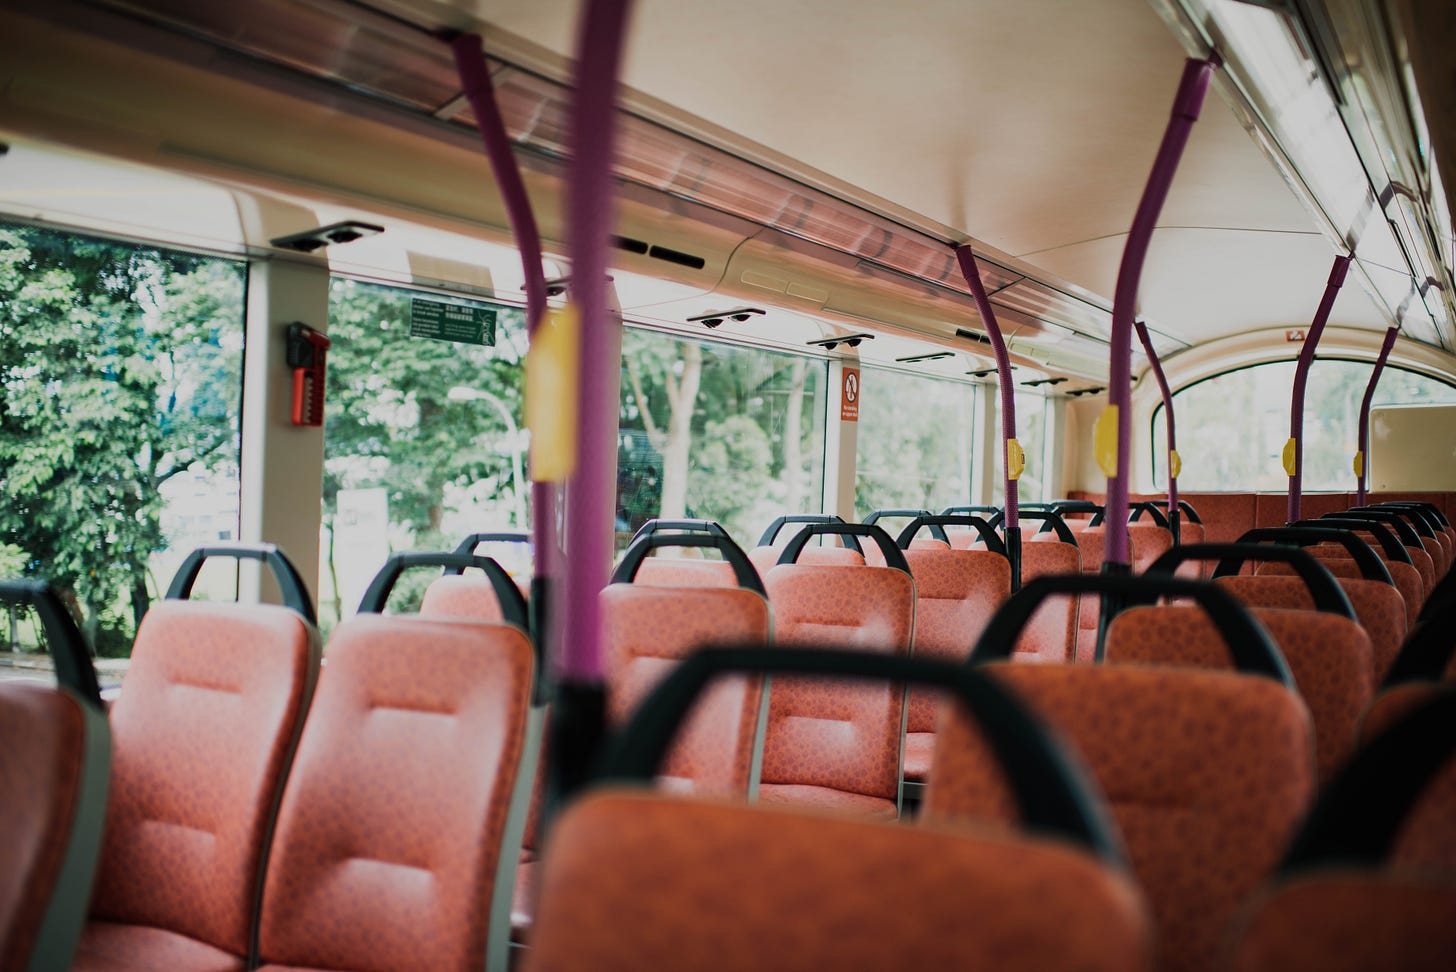 Empty bus seats with trees visible through the windows